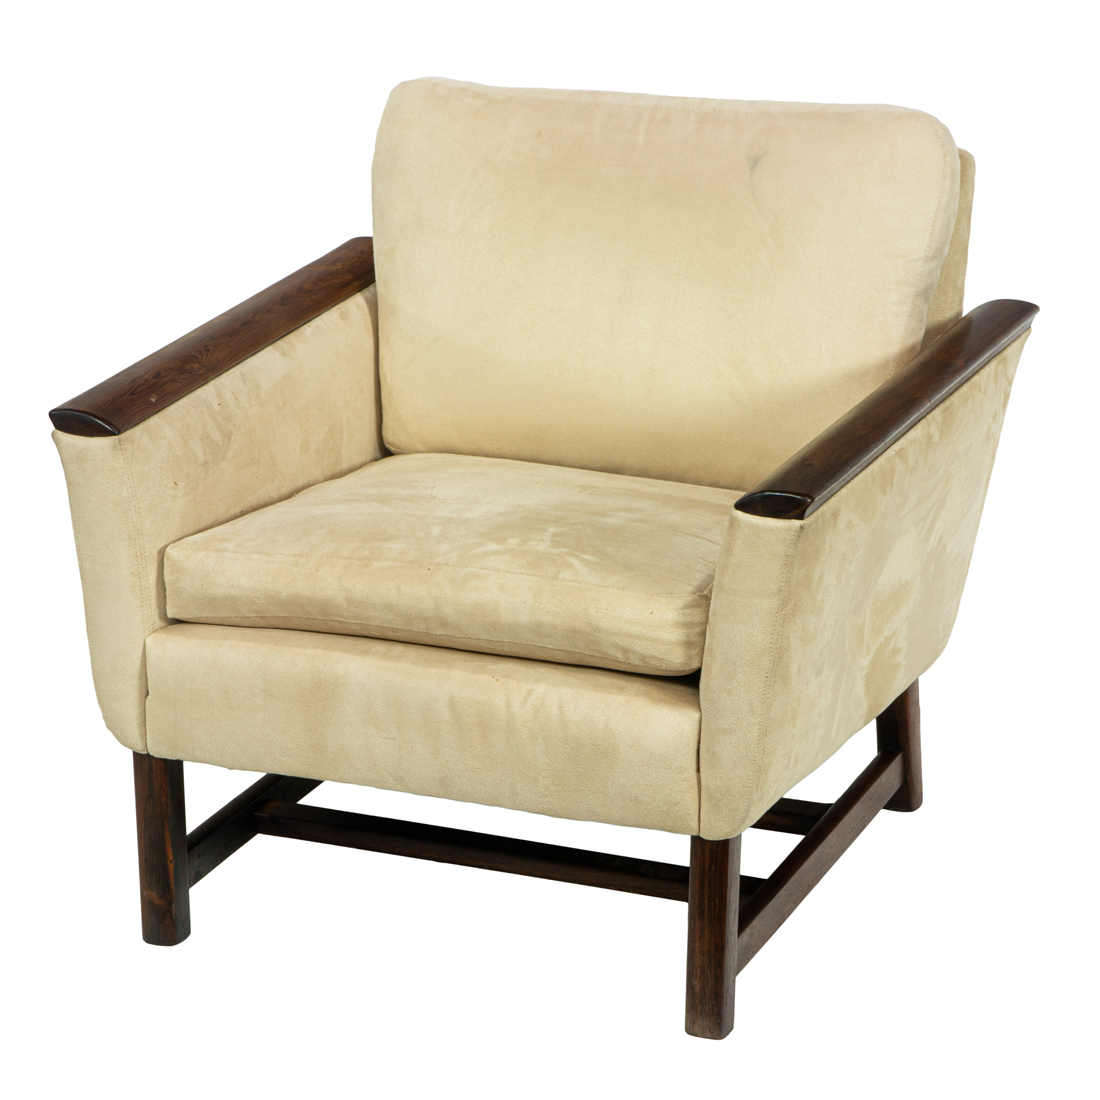 A MID-CENTURY MODERN SUEDE UPHOLSTERED